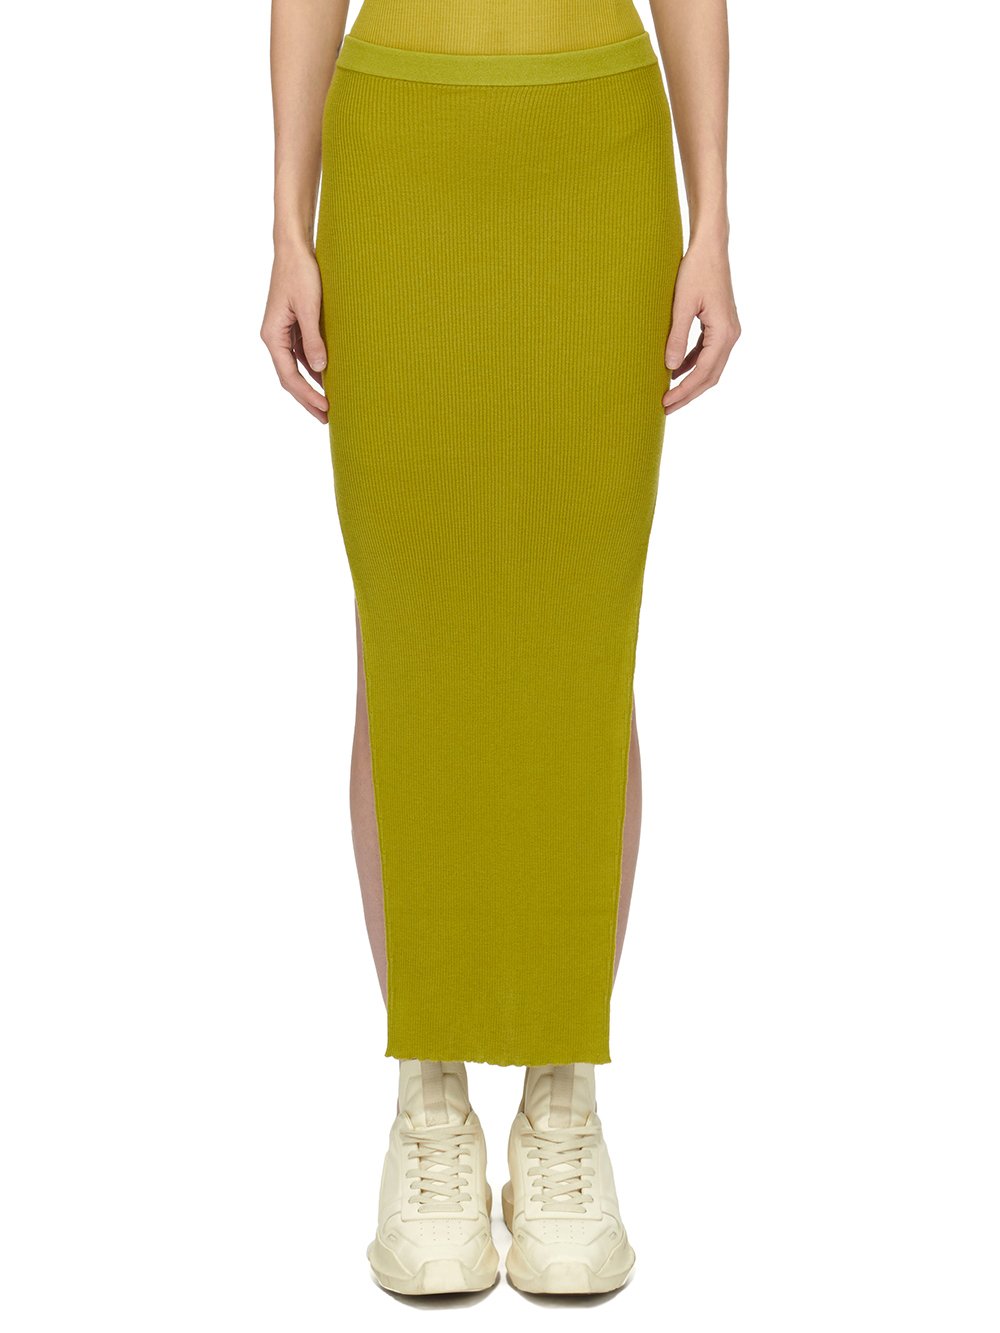 RICK OWENS FW23 LUXOR RIBBED SACRISKIRT IN ACID YELLOW LIGHTWEIGHT RIBBED KNIT